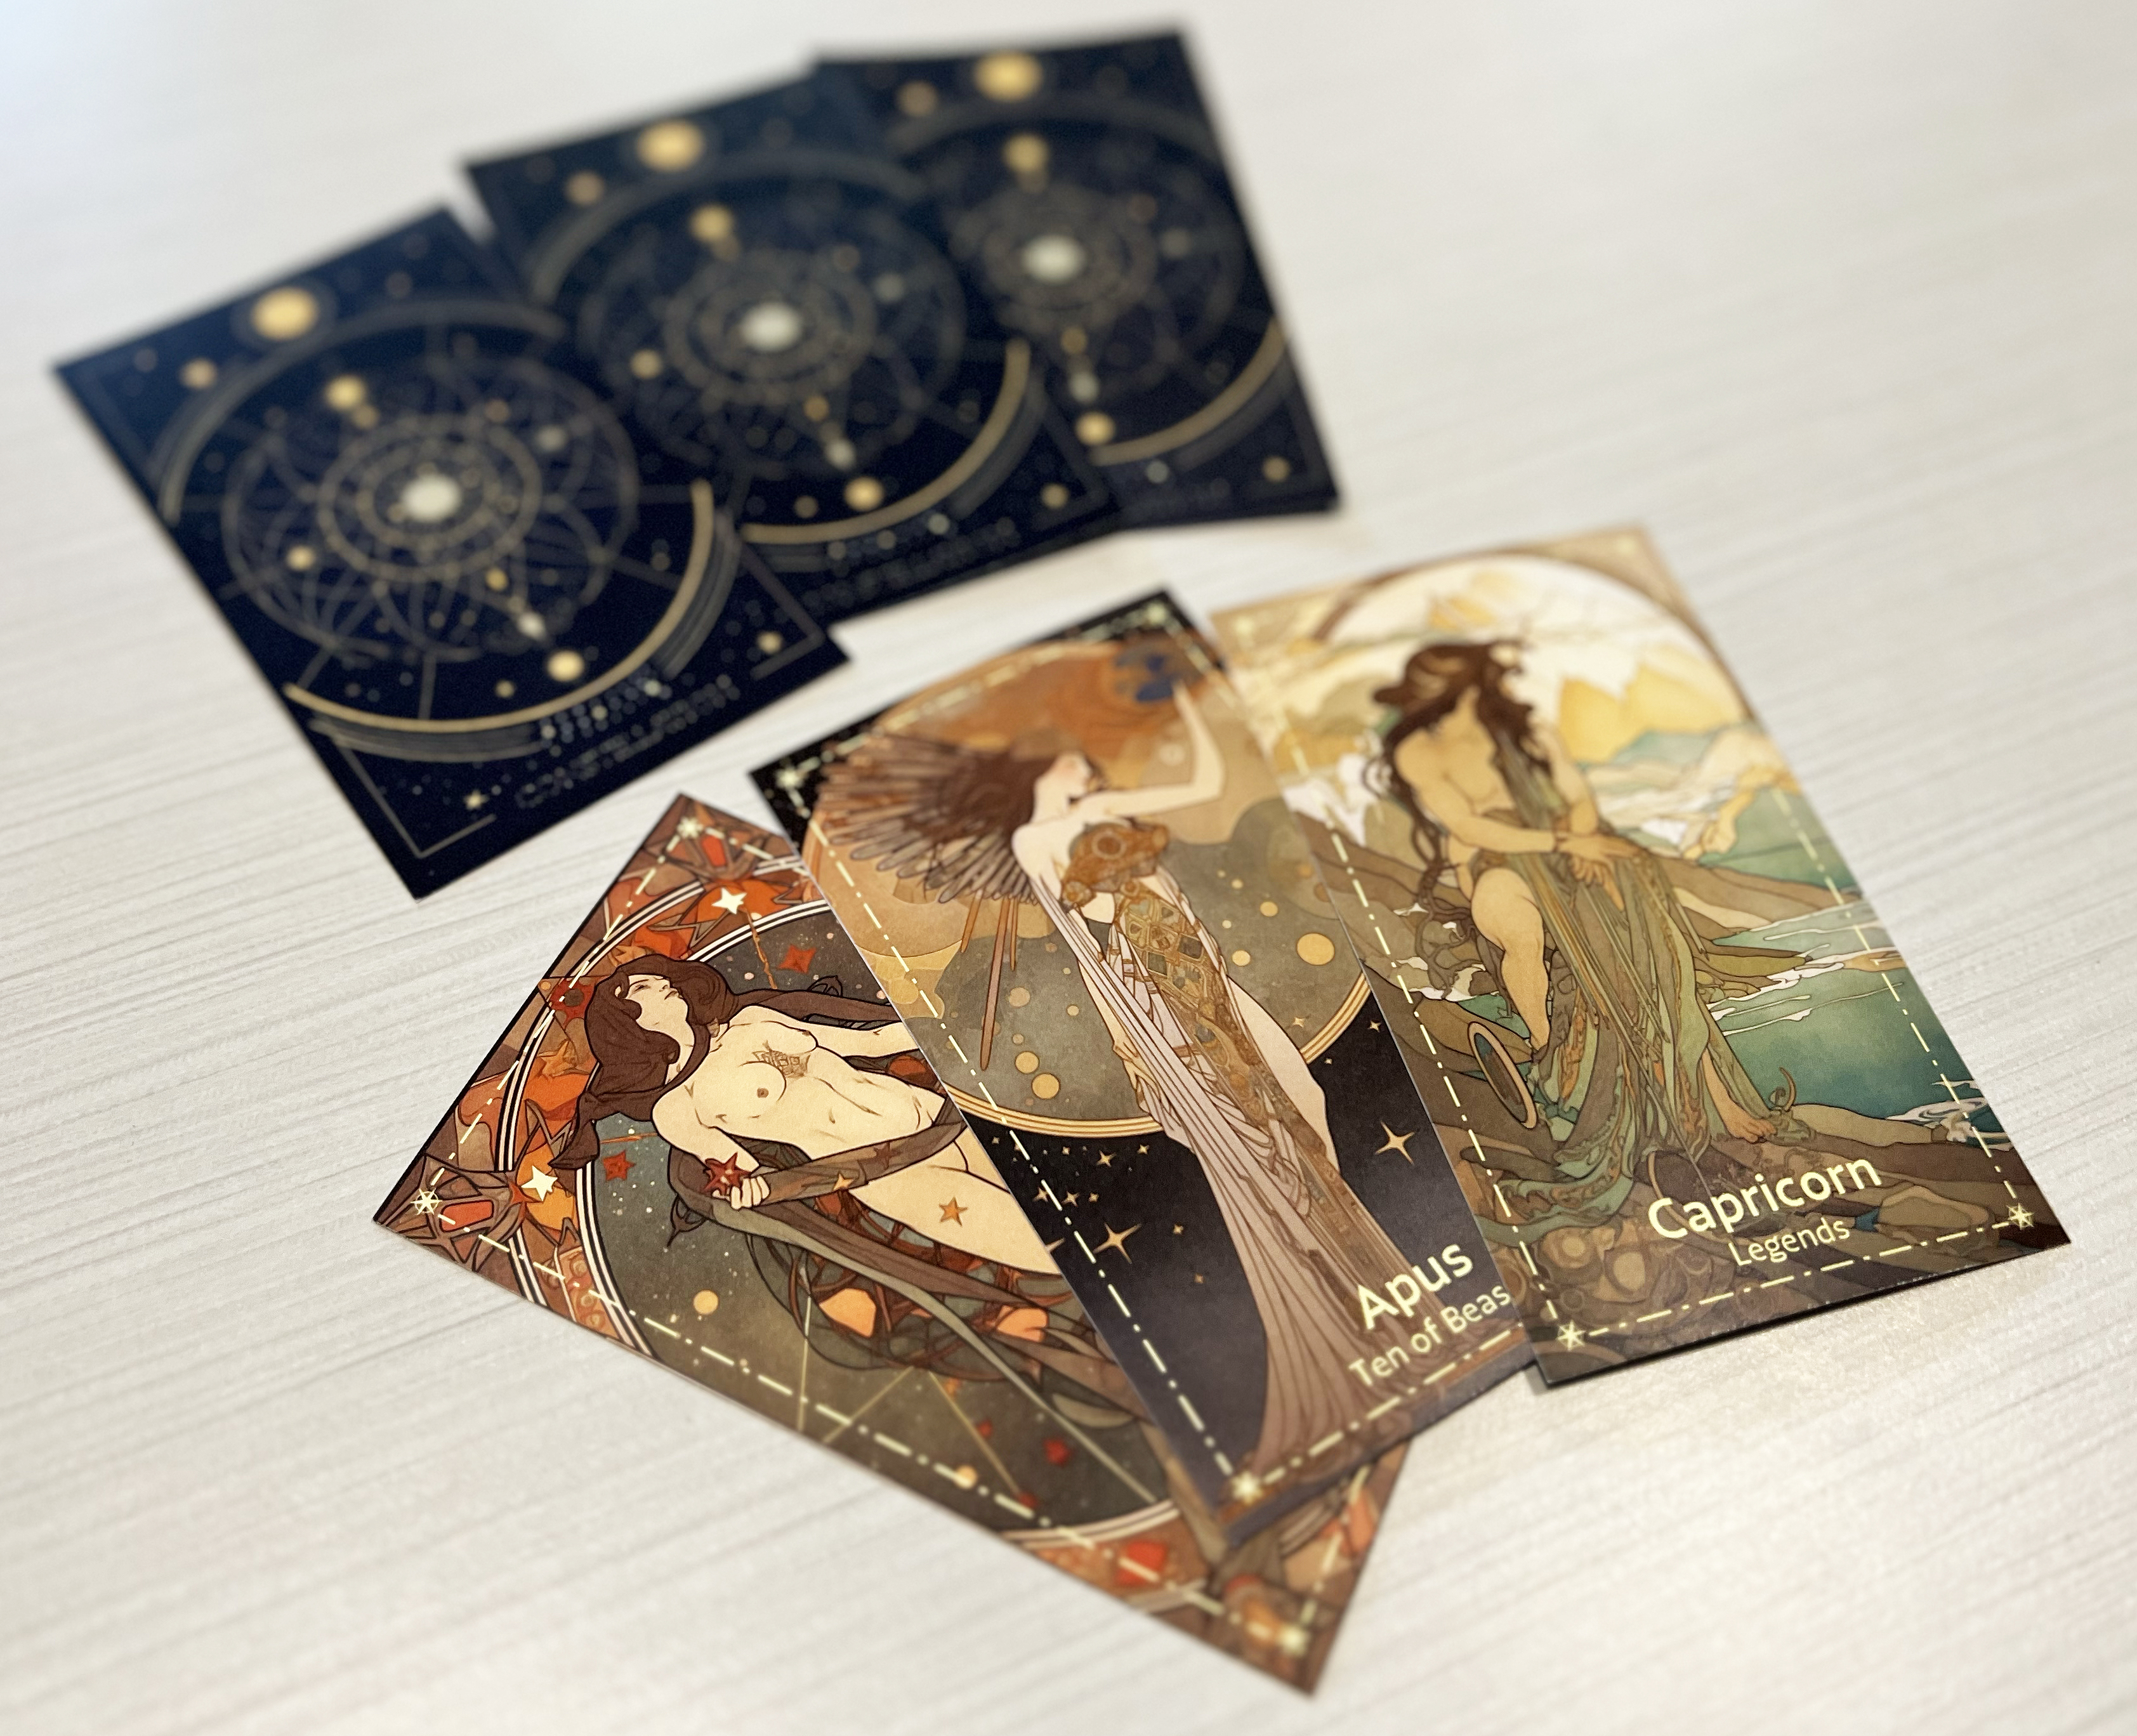 AI-generated tarot cards were part of a student's final project